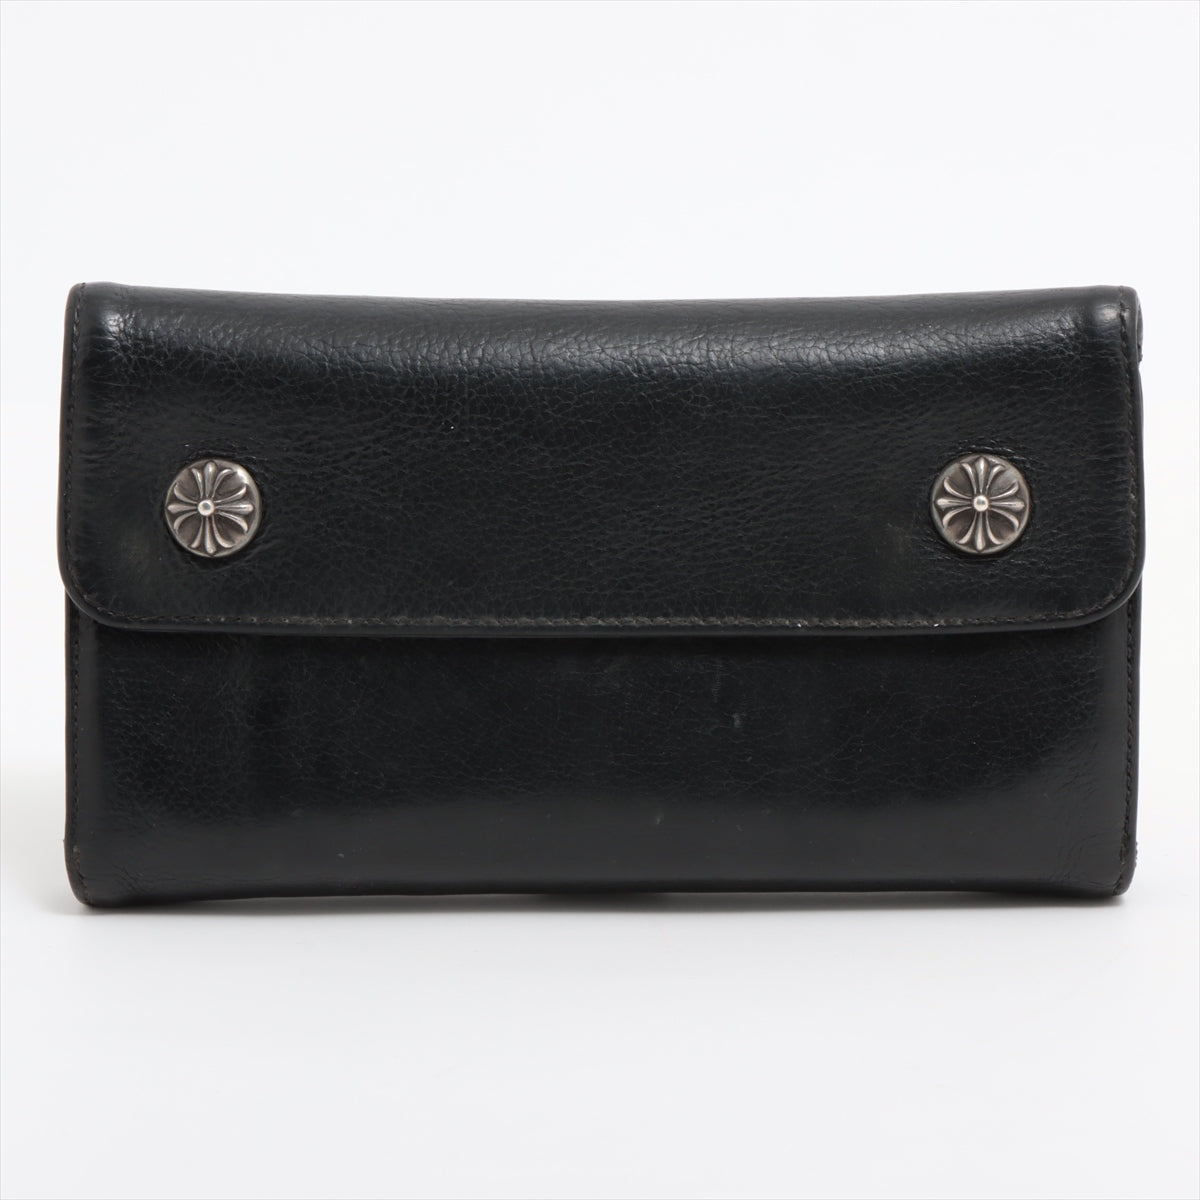 Chrome Hearts Wave Wallet Leather & 925 Black × Silver cross ball button